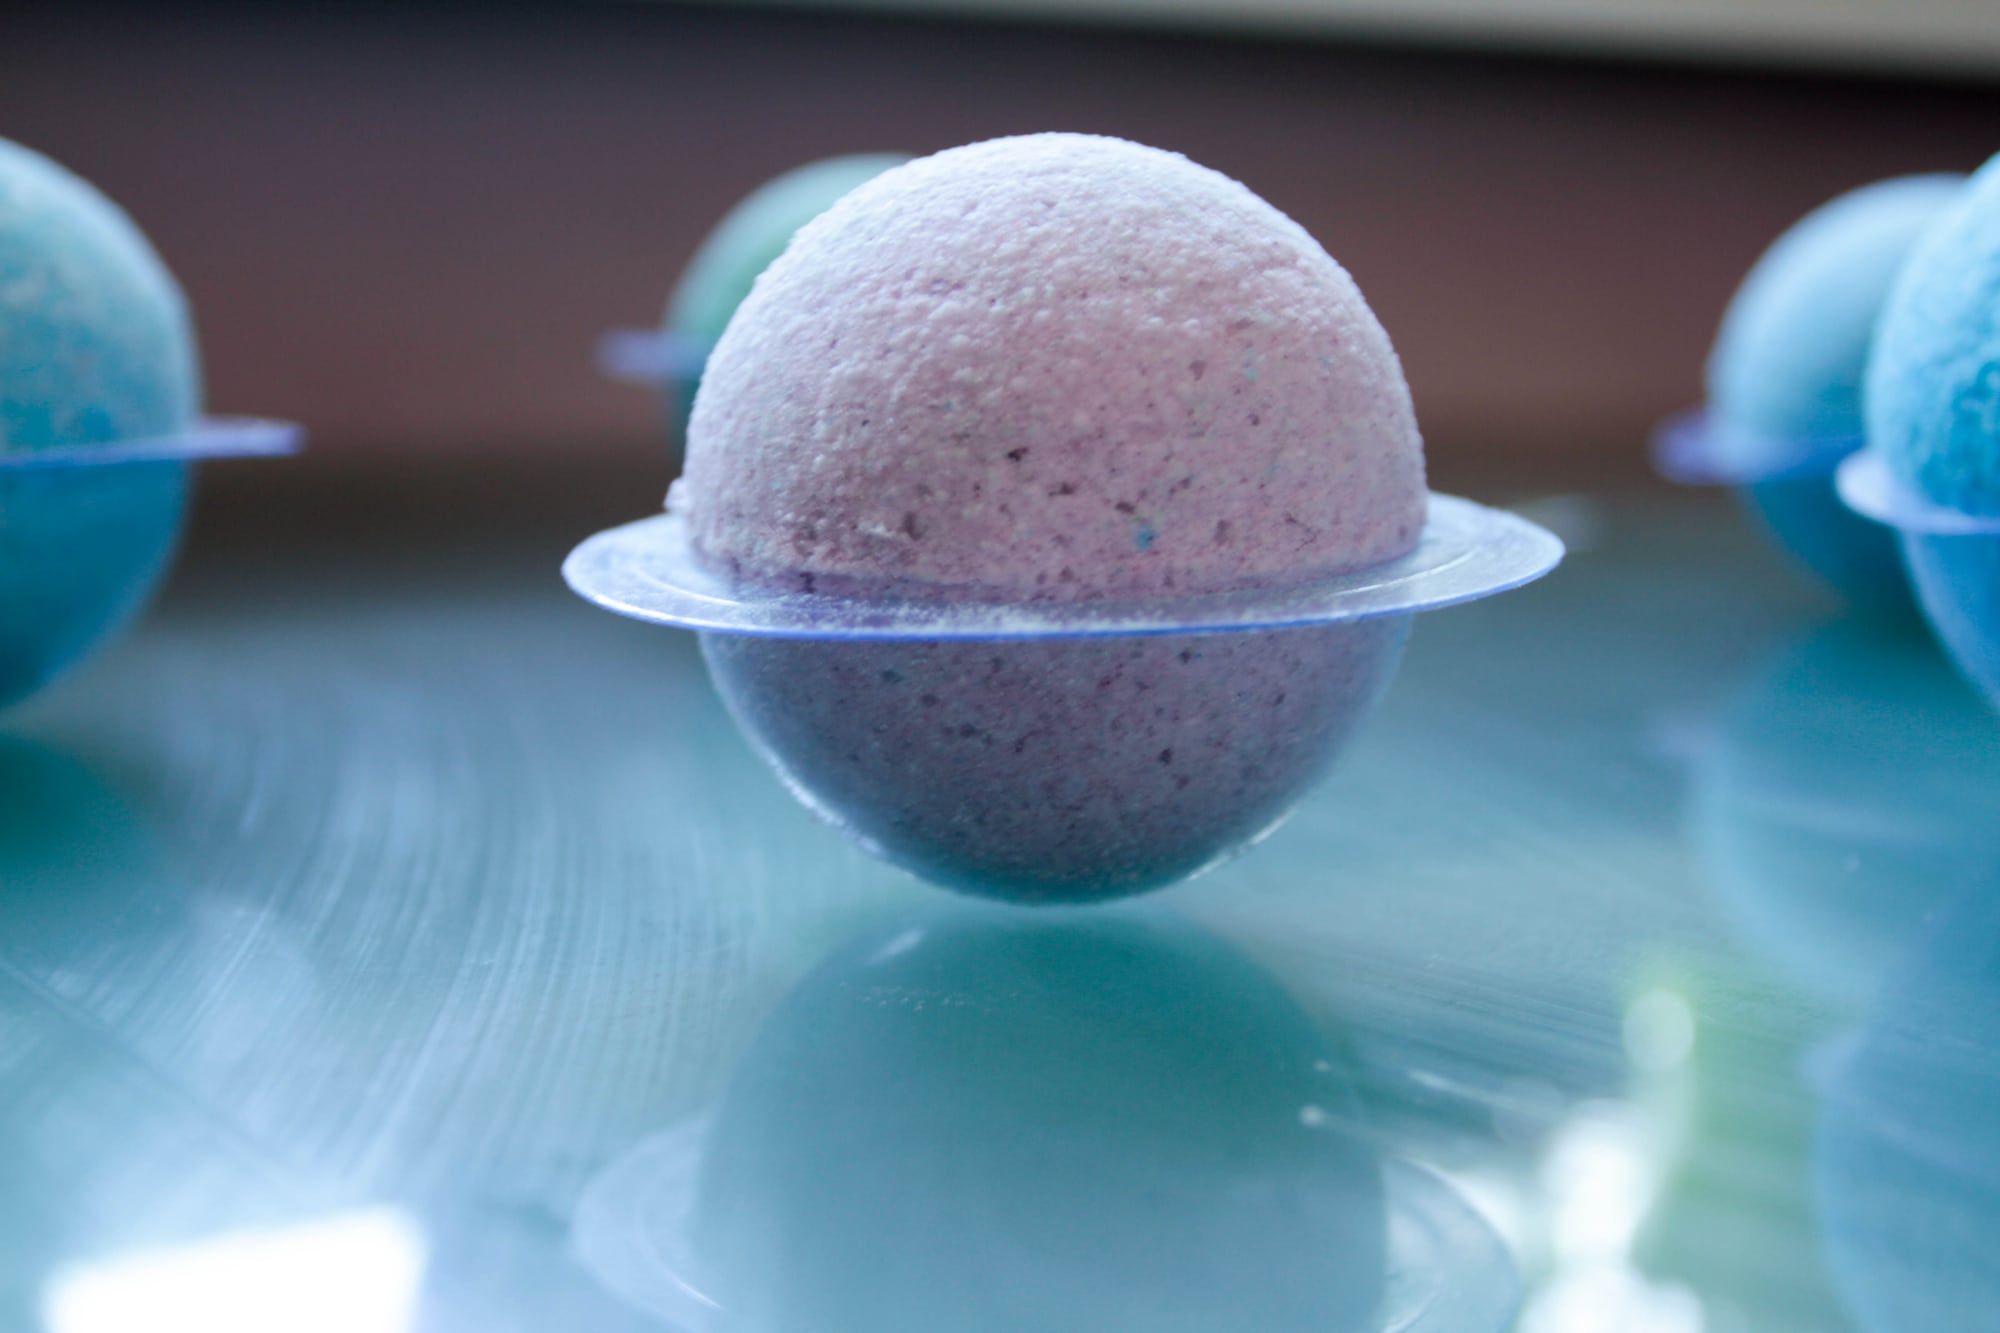 Which common bath bomb ingredients are not nut free?